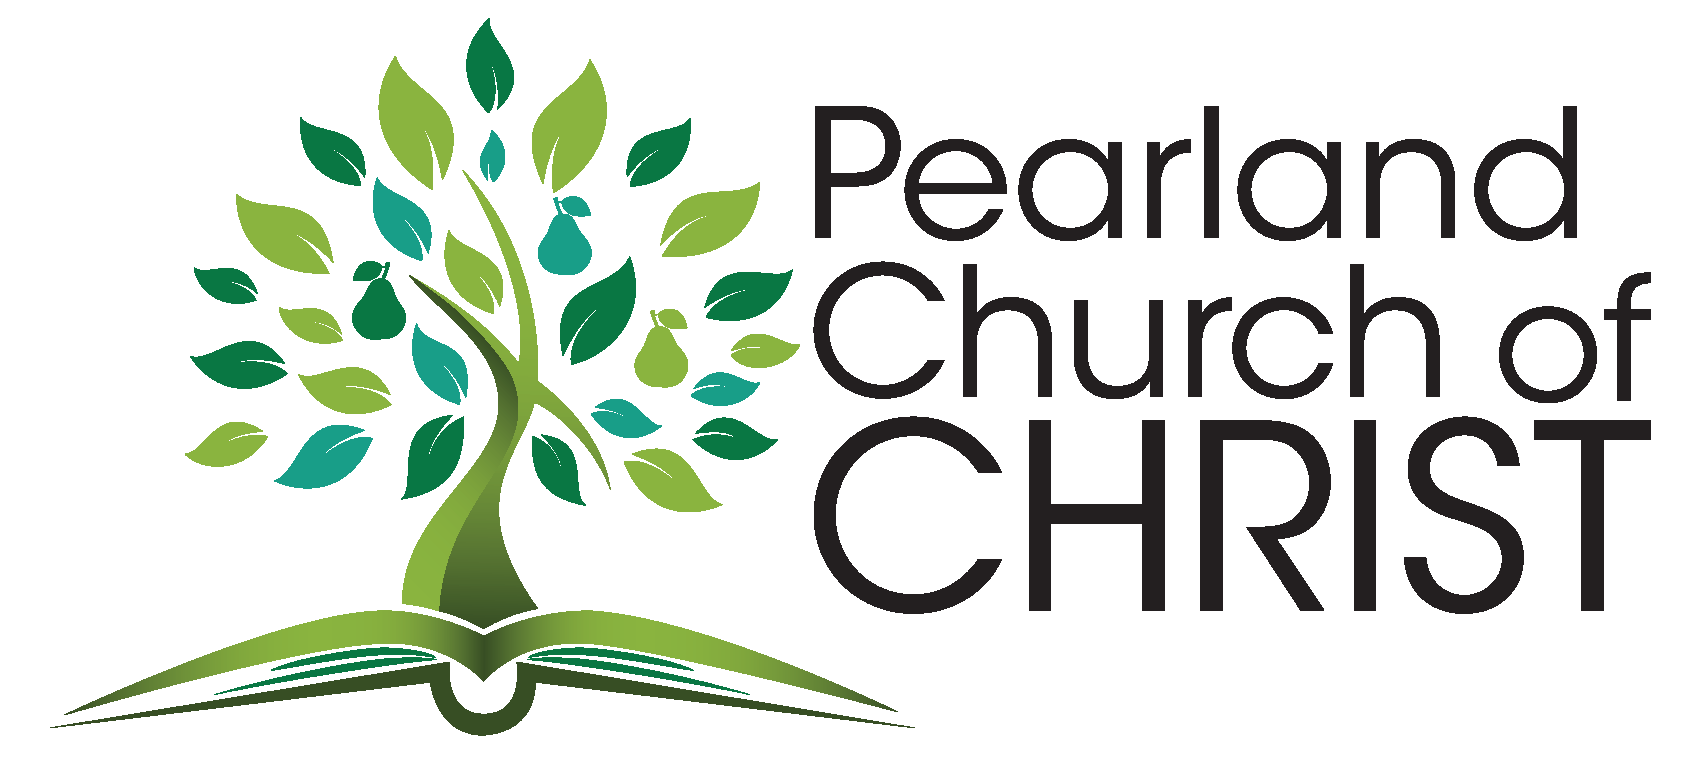 Pearland Church of Christ